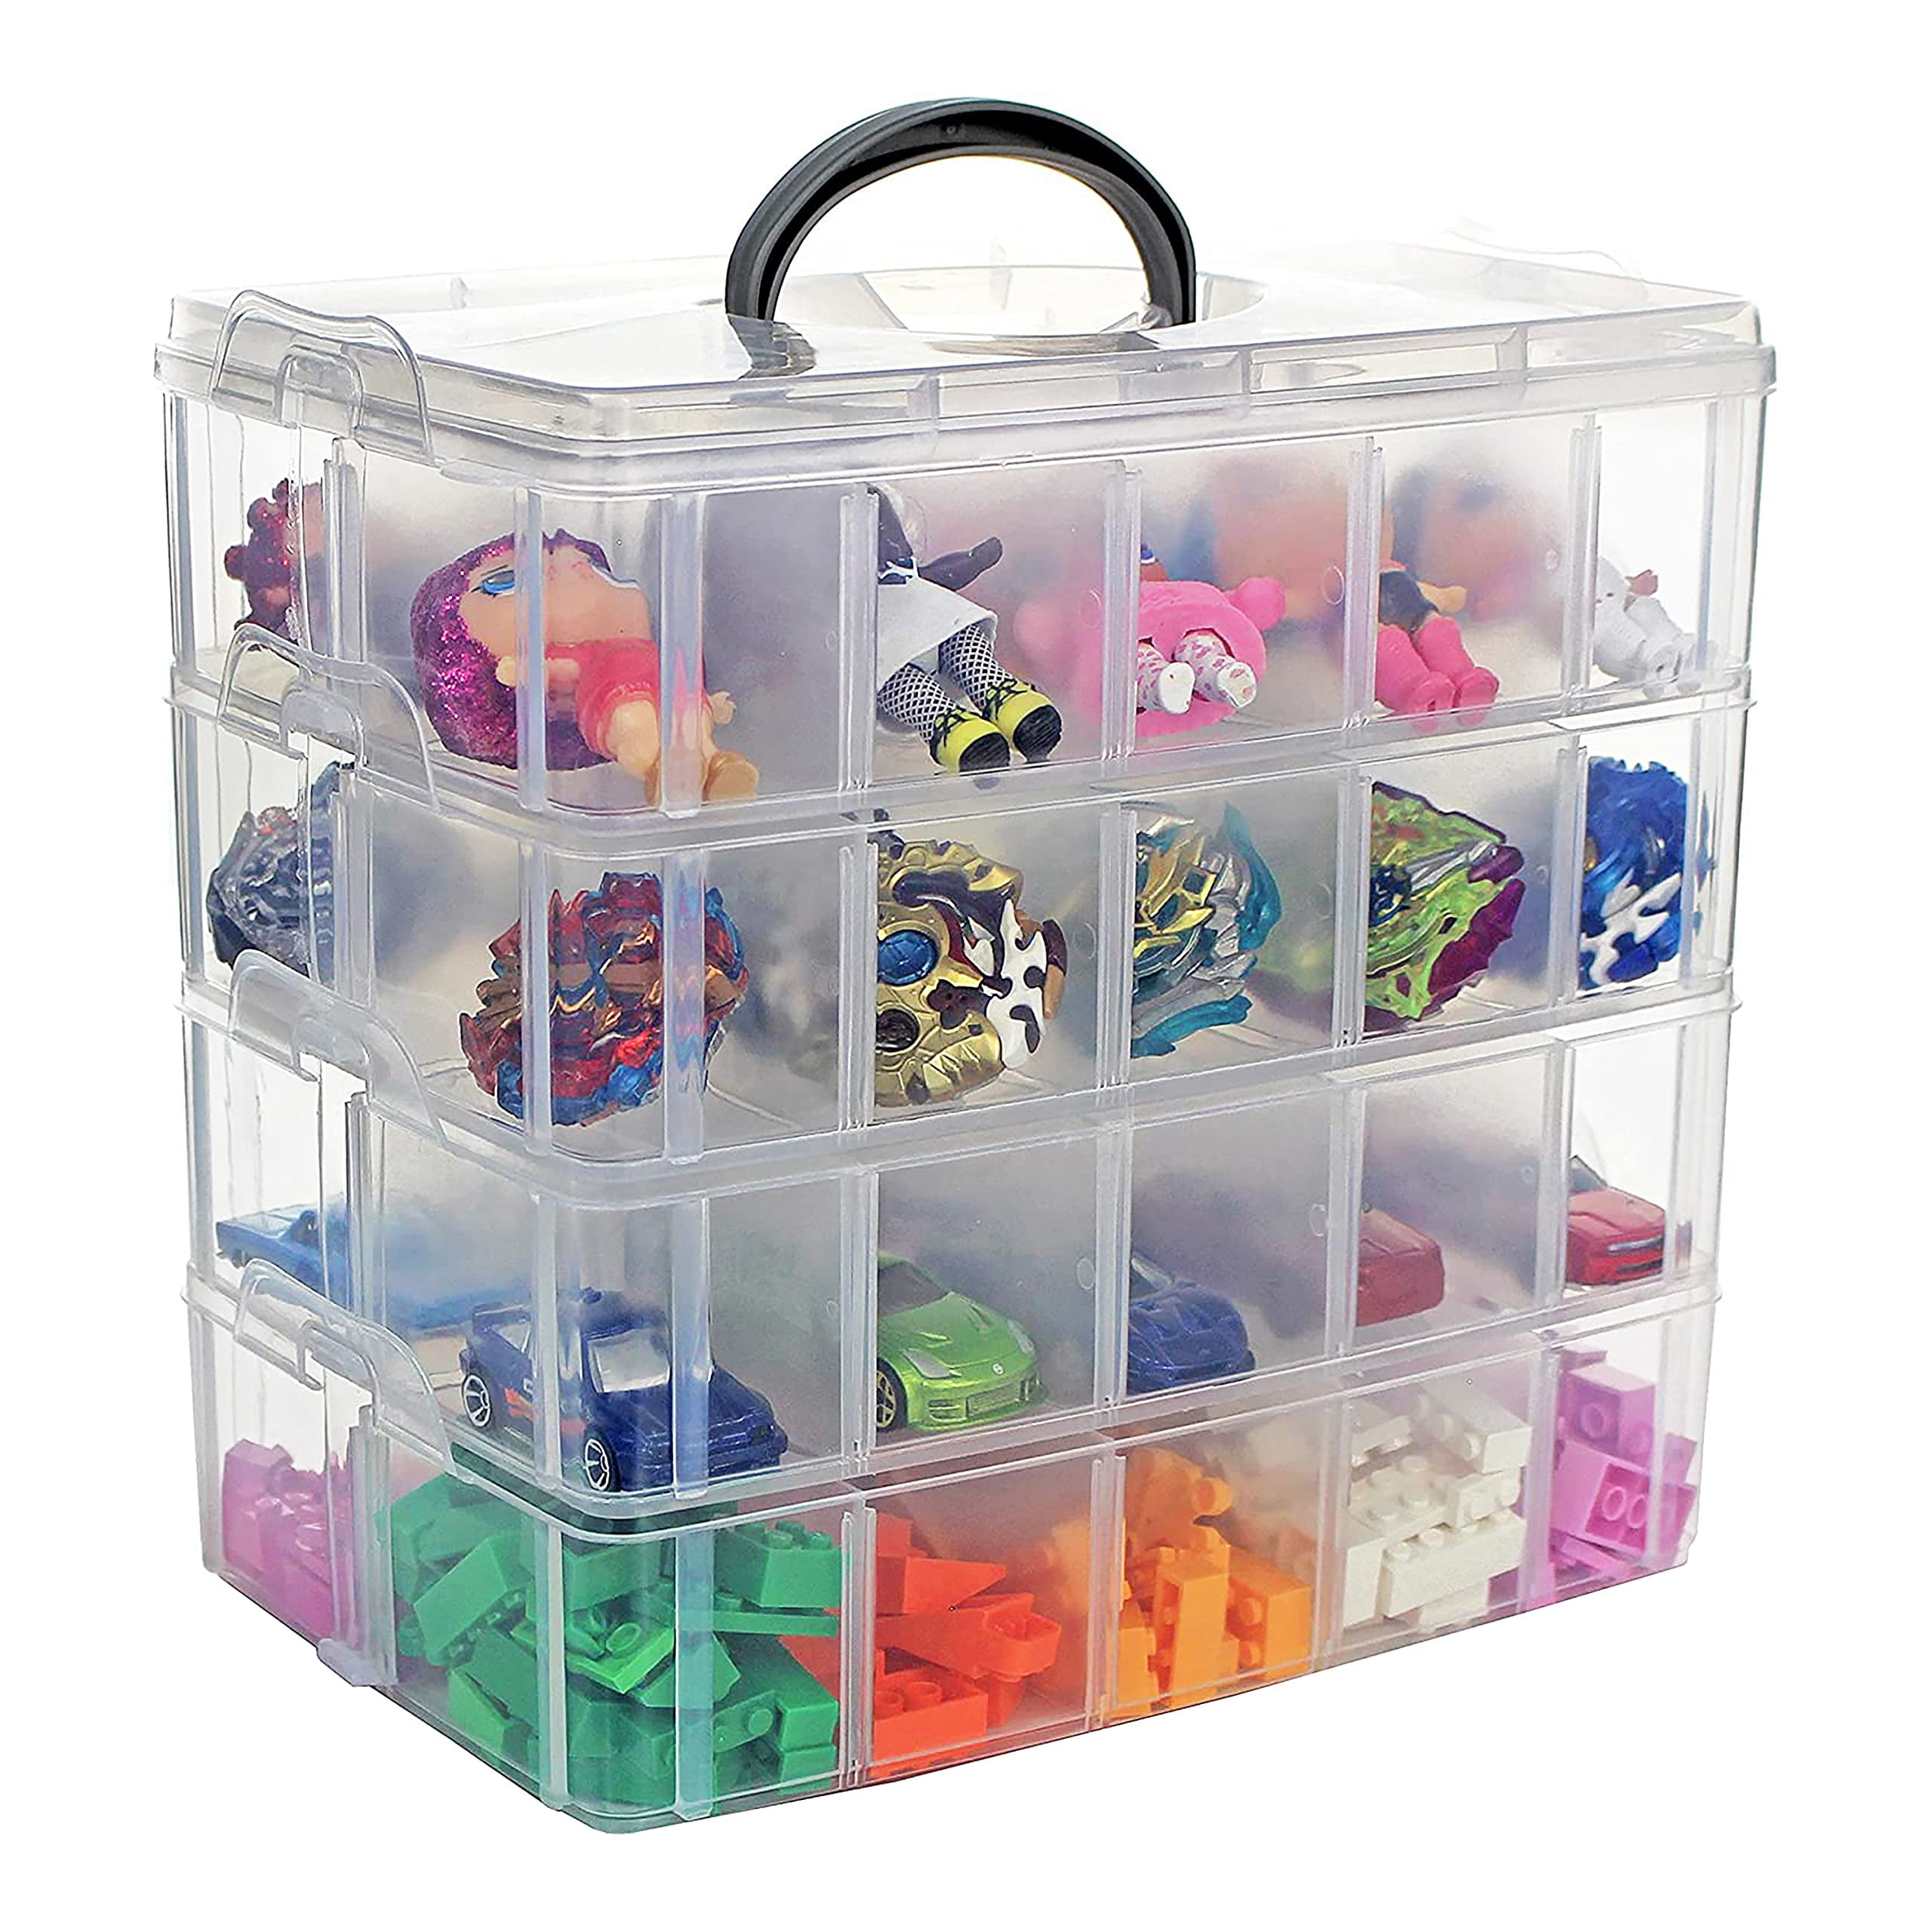 Toy Storage Organizer Case Compatible with Hot Wheels Car, Matchbox Cars,  Portable Carrying Container Carrier Holder Fit for 88 Toys Car (Box Only)